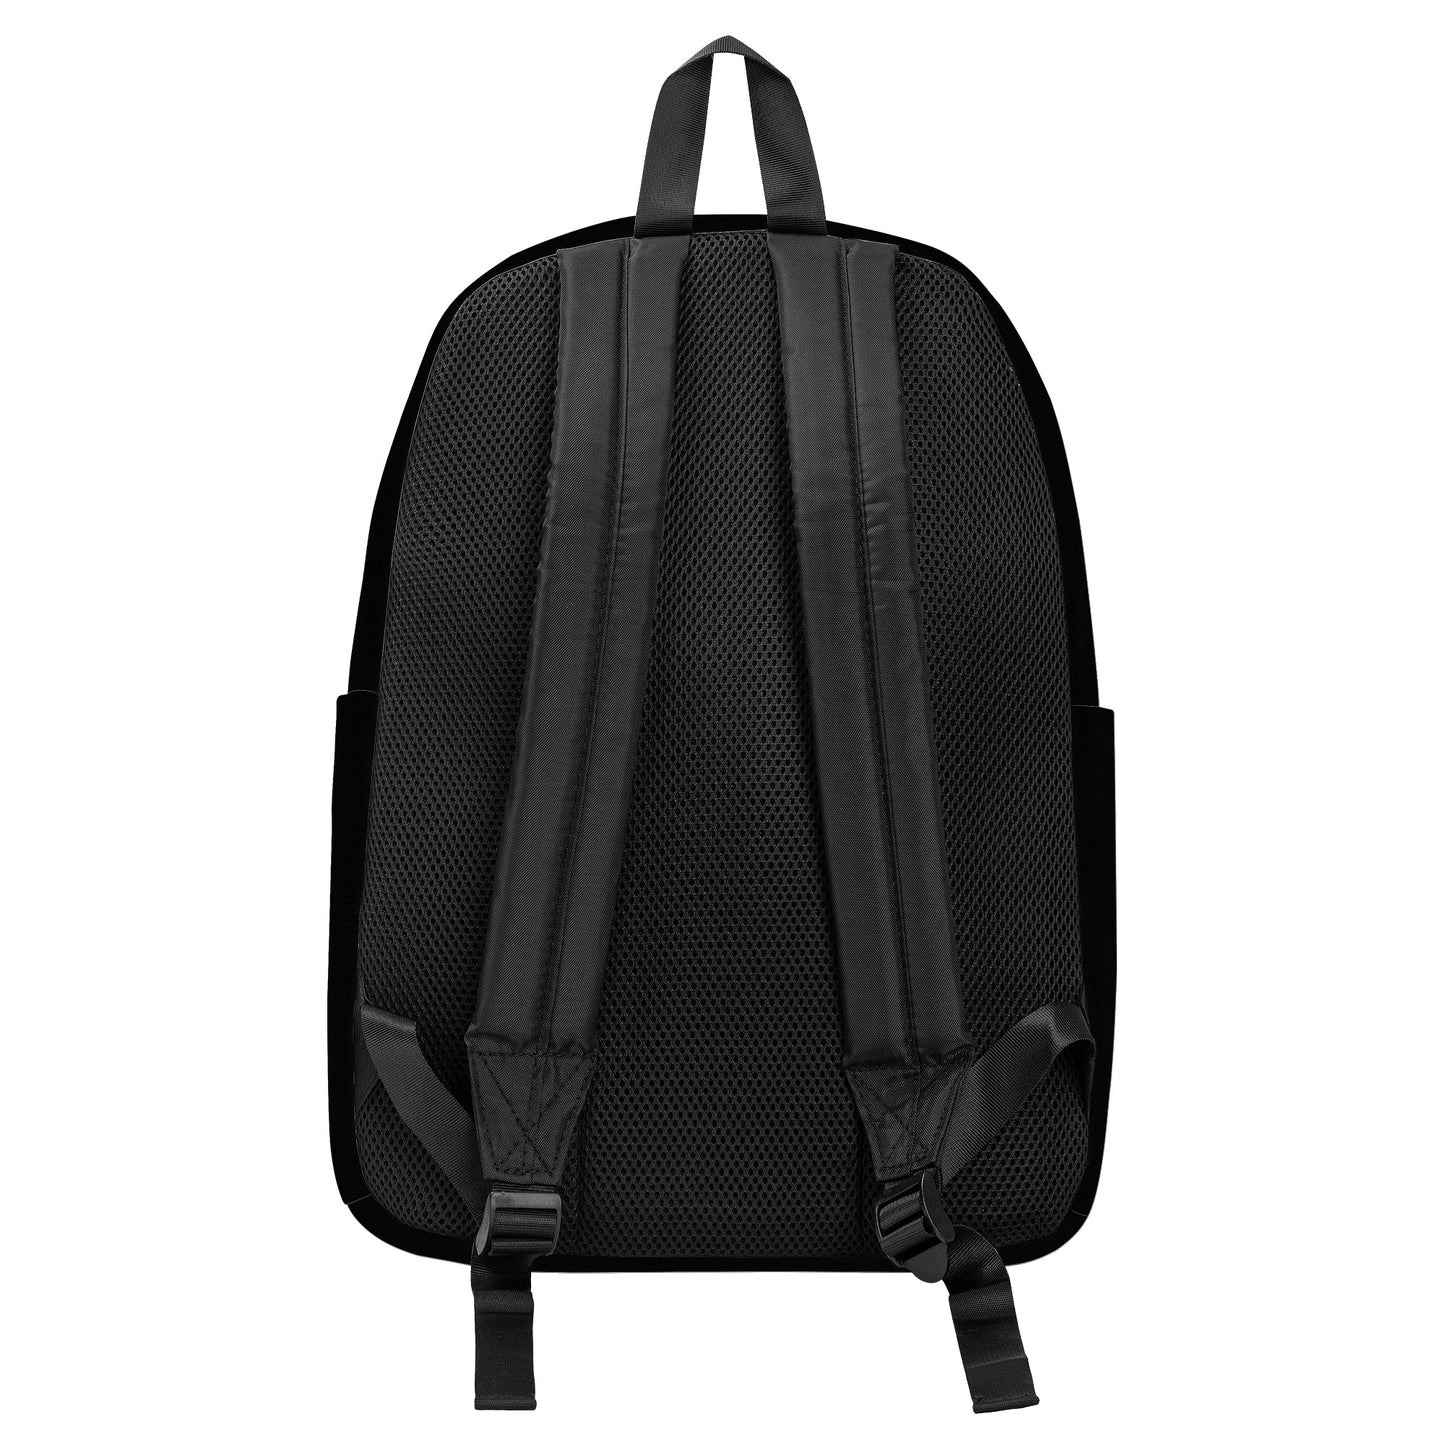 Cryptic Canvas Backpack, Black